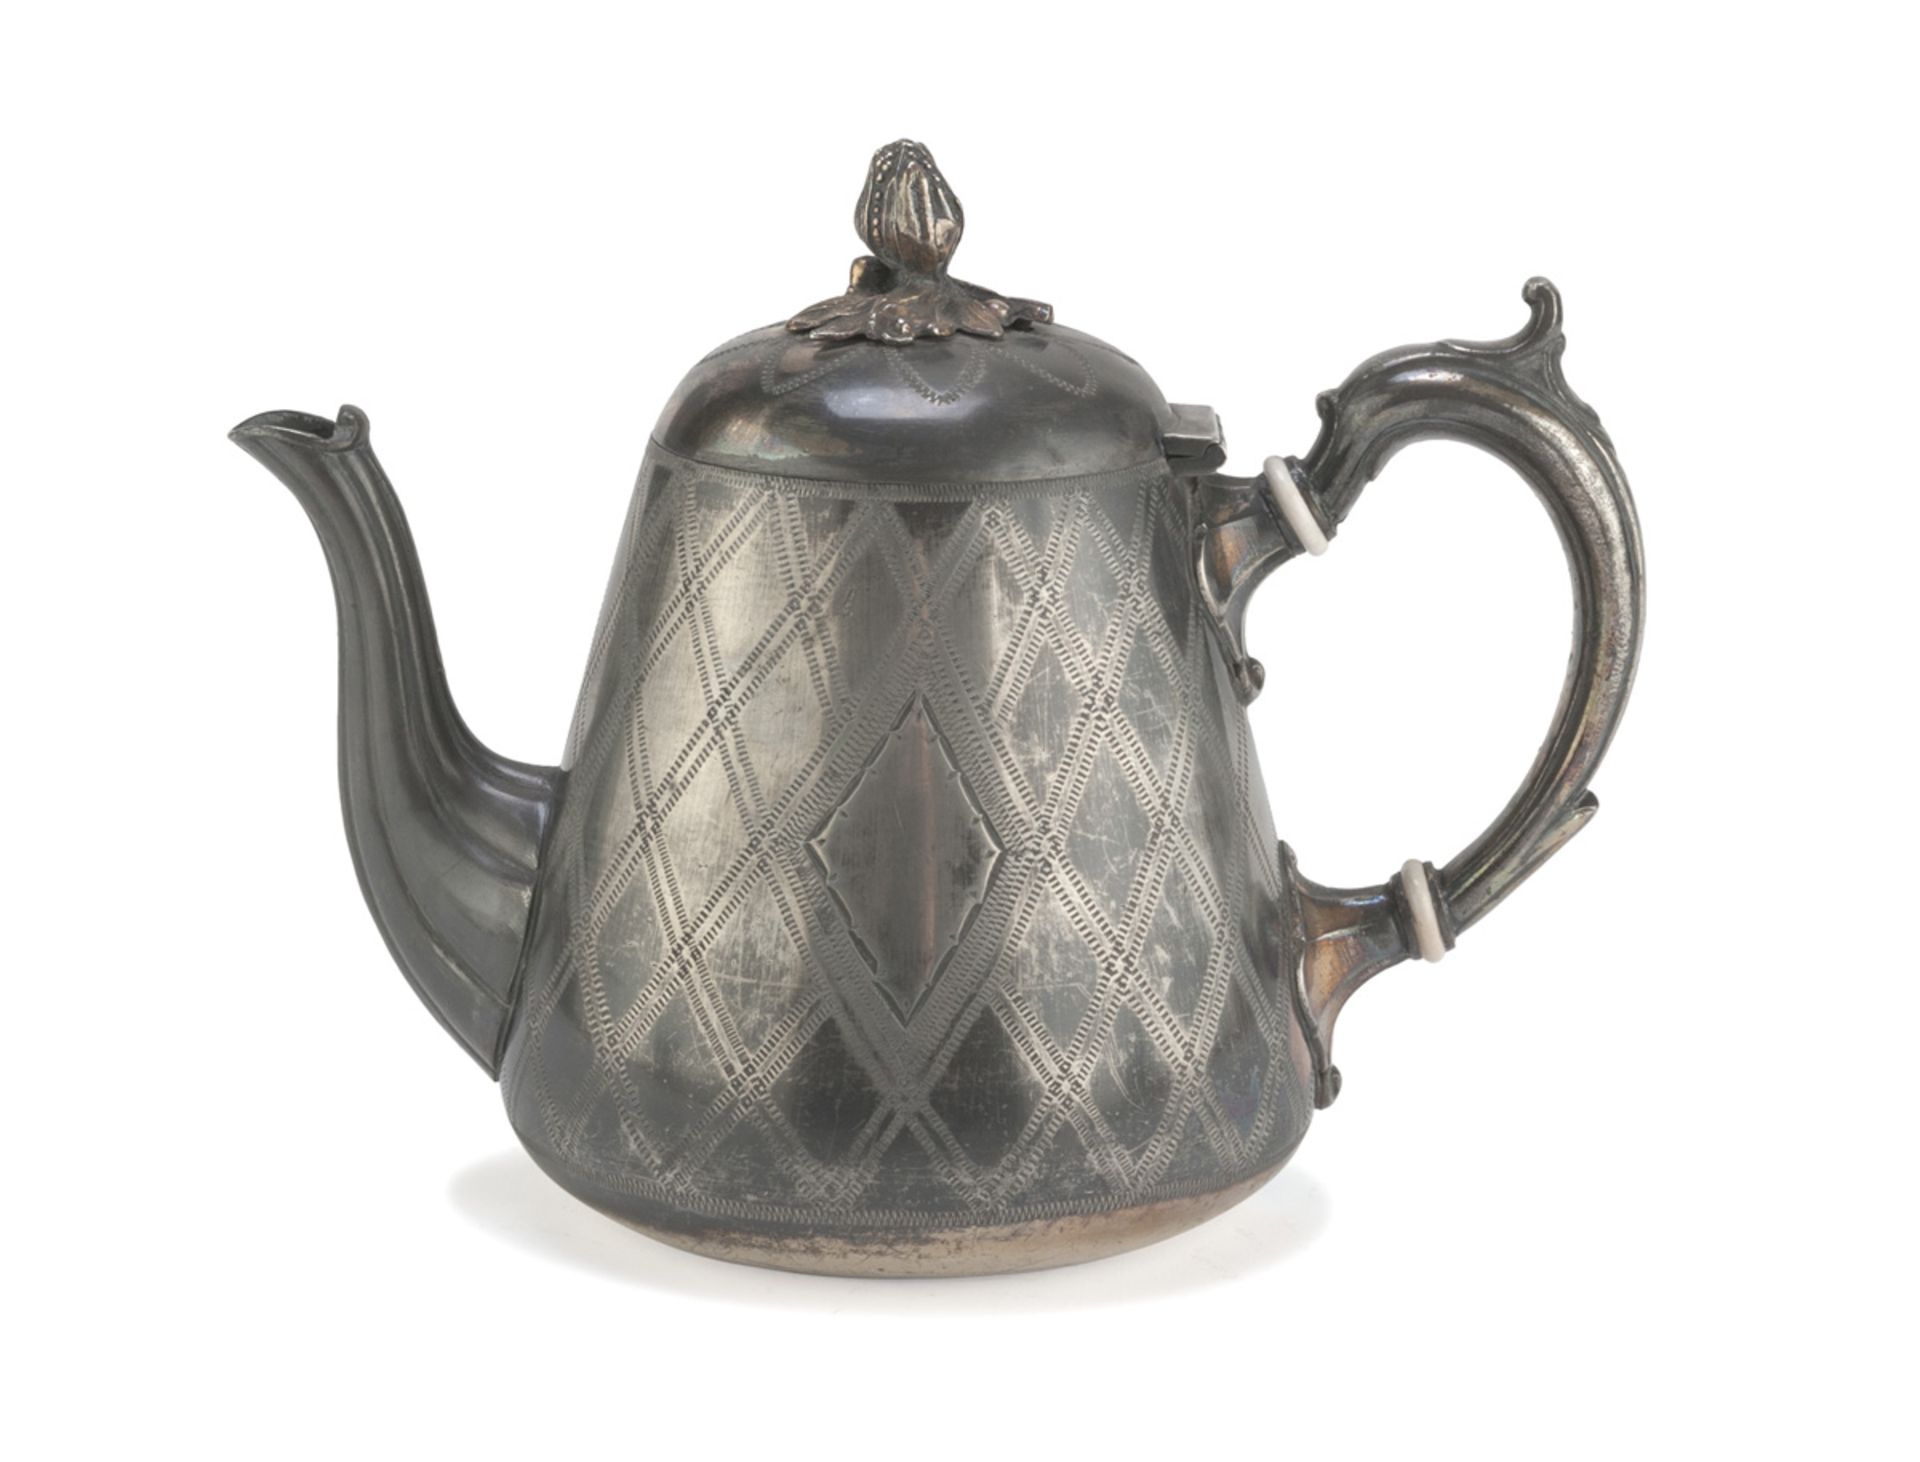 SILVER-PLATED TEAPOT, SHEFFIELD EARLY 20TH CENTURY body engraved with grid, handle with